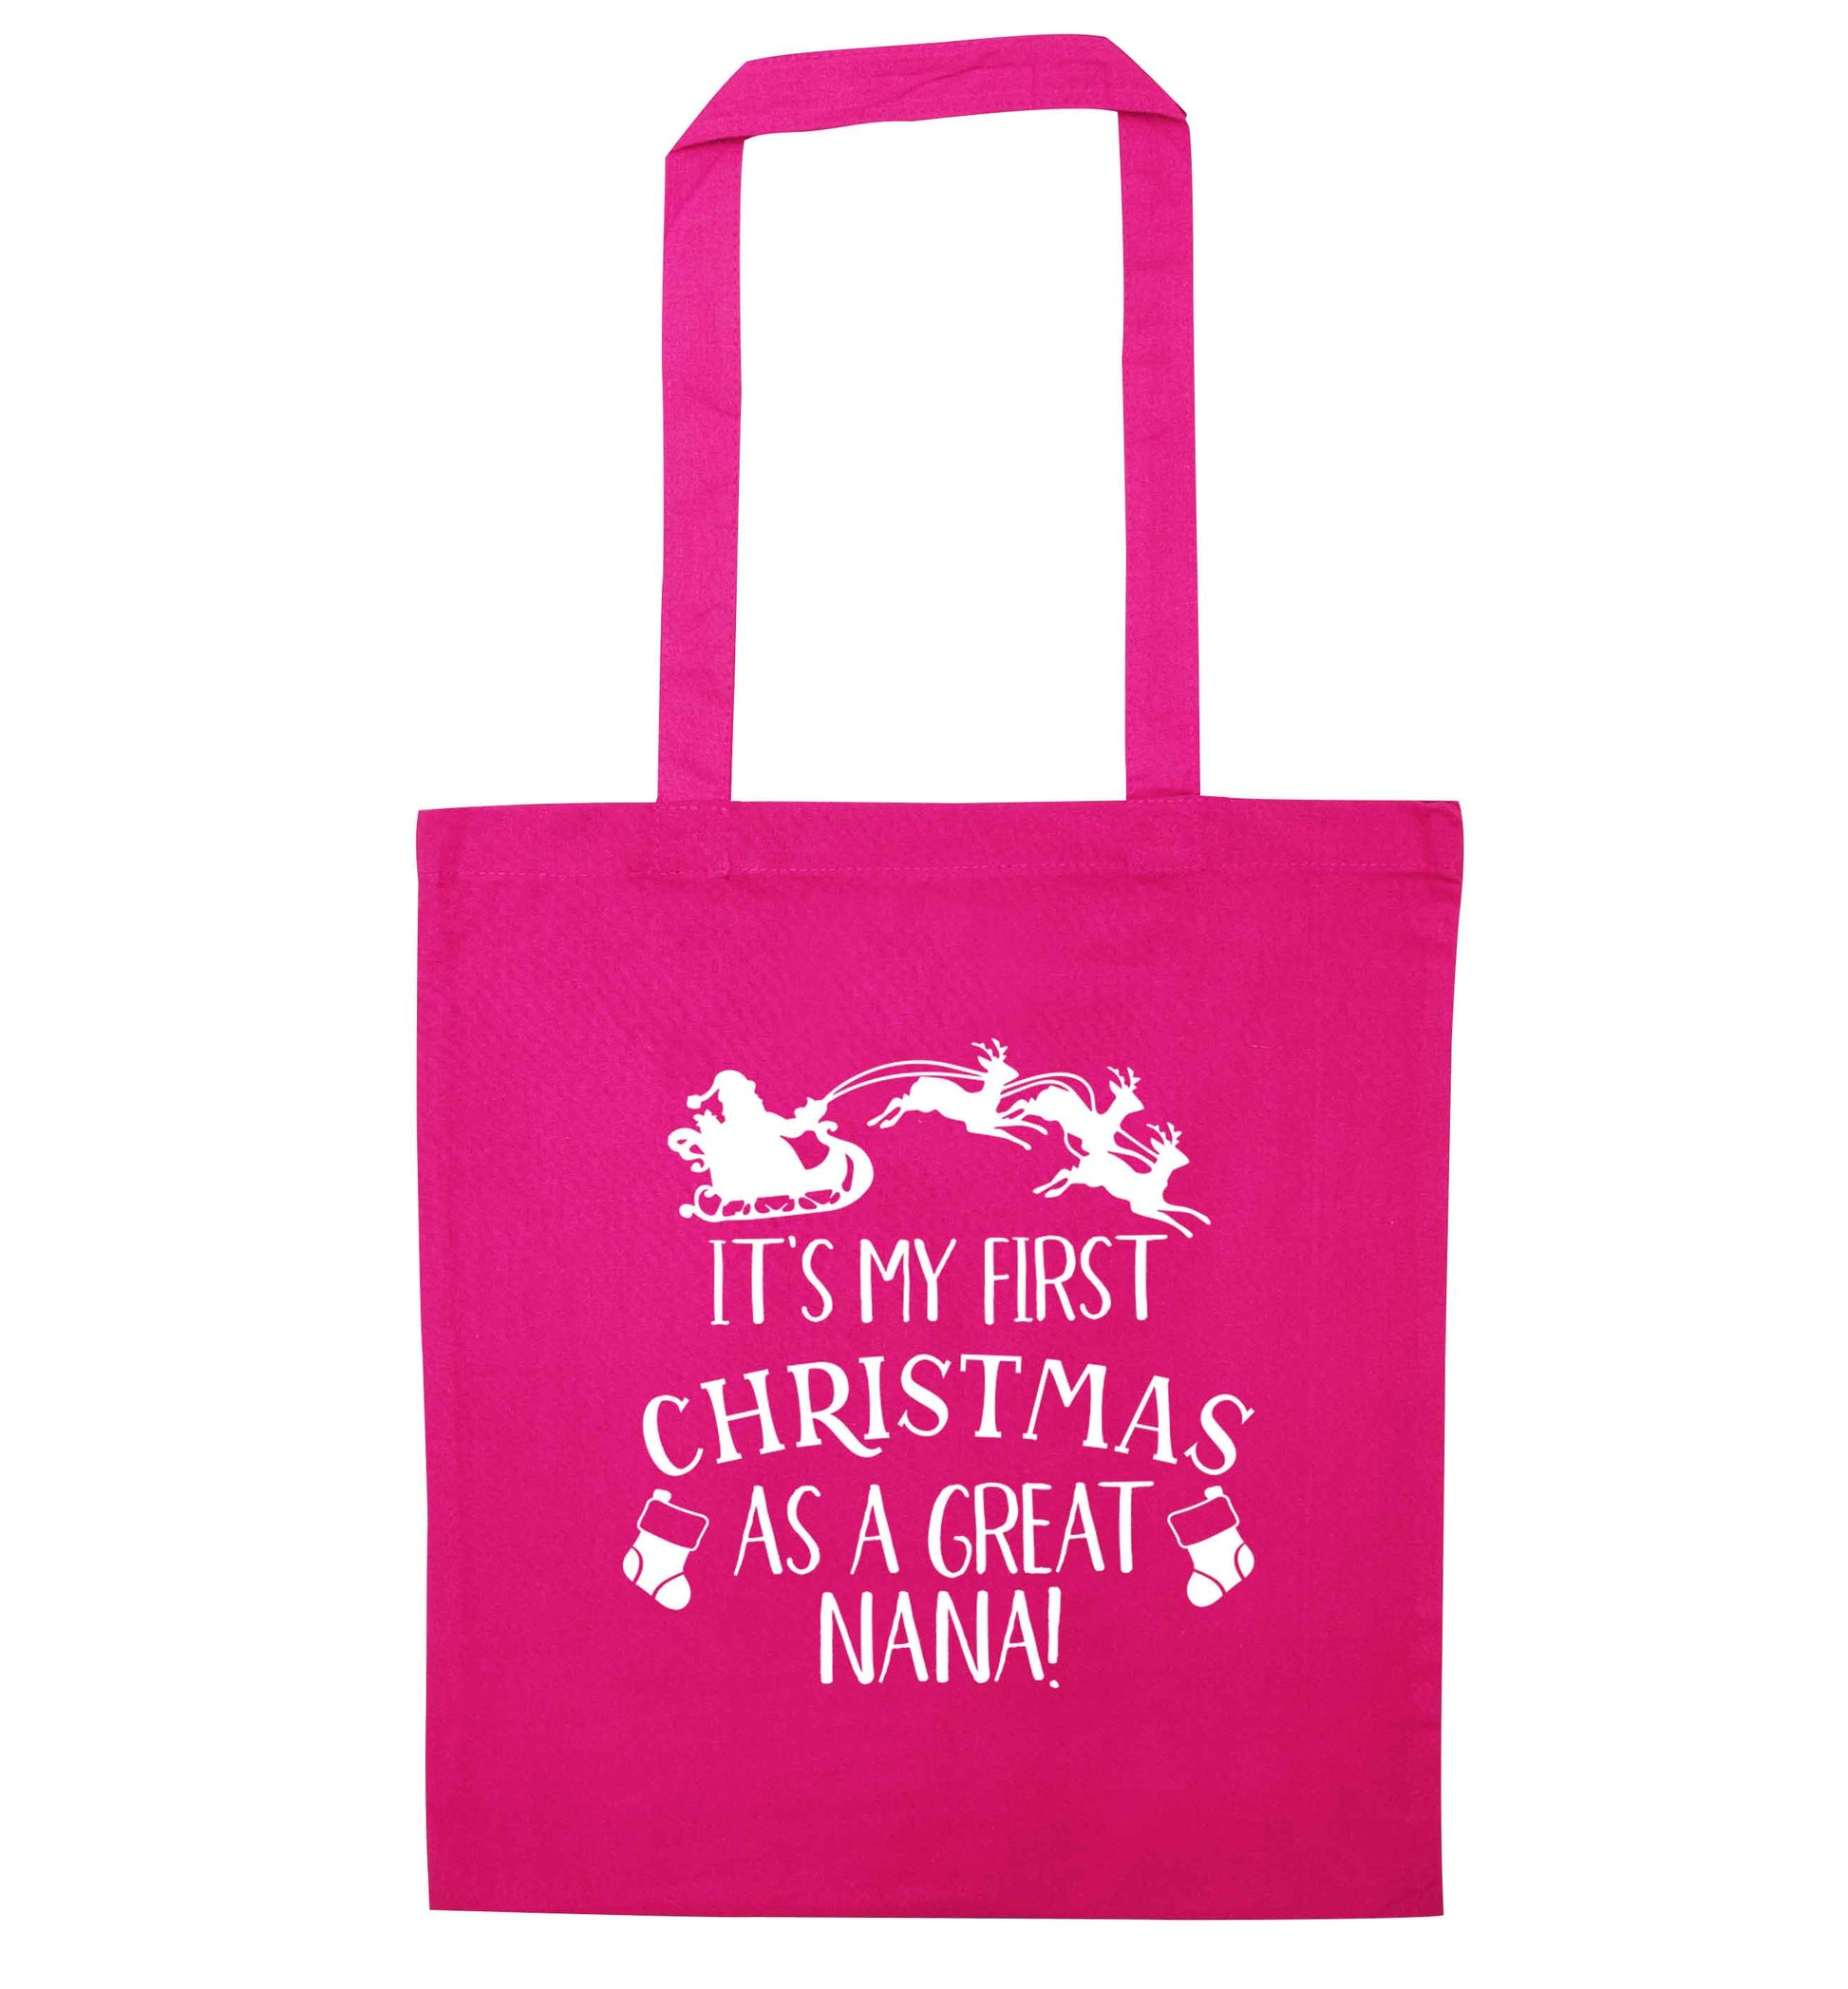 It's my first Christmas as a great nana! pink tote bag